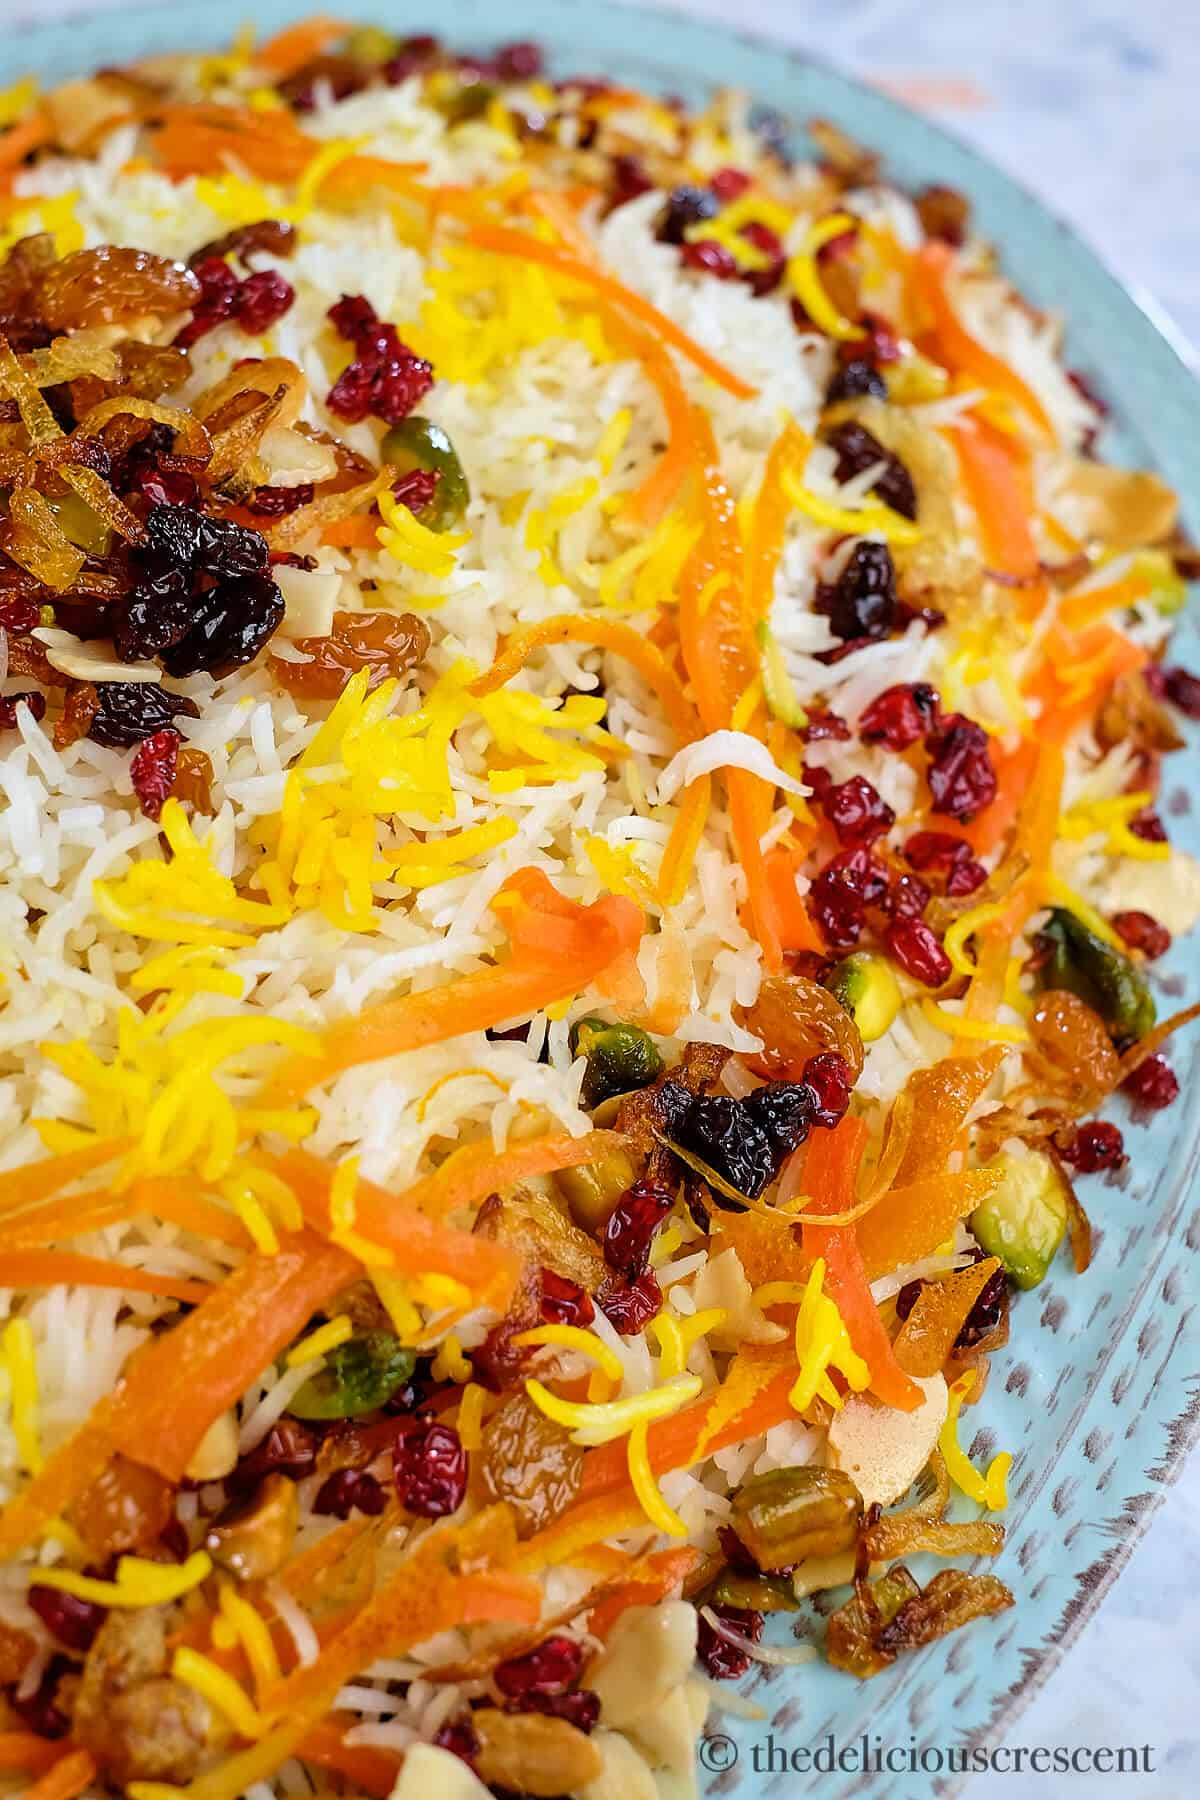 Jeweled rice served in a platter.